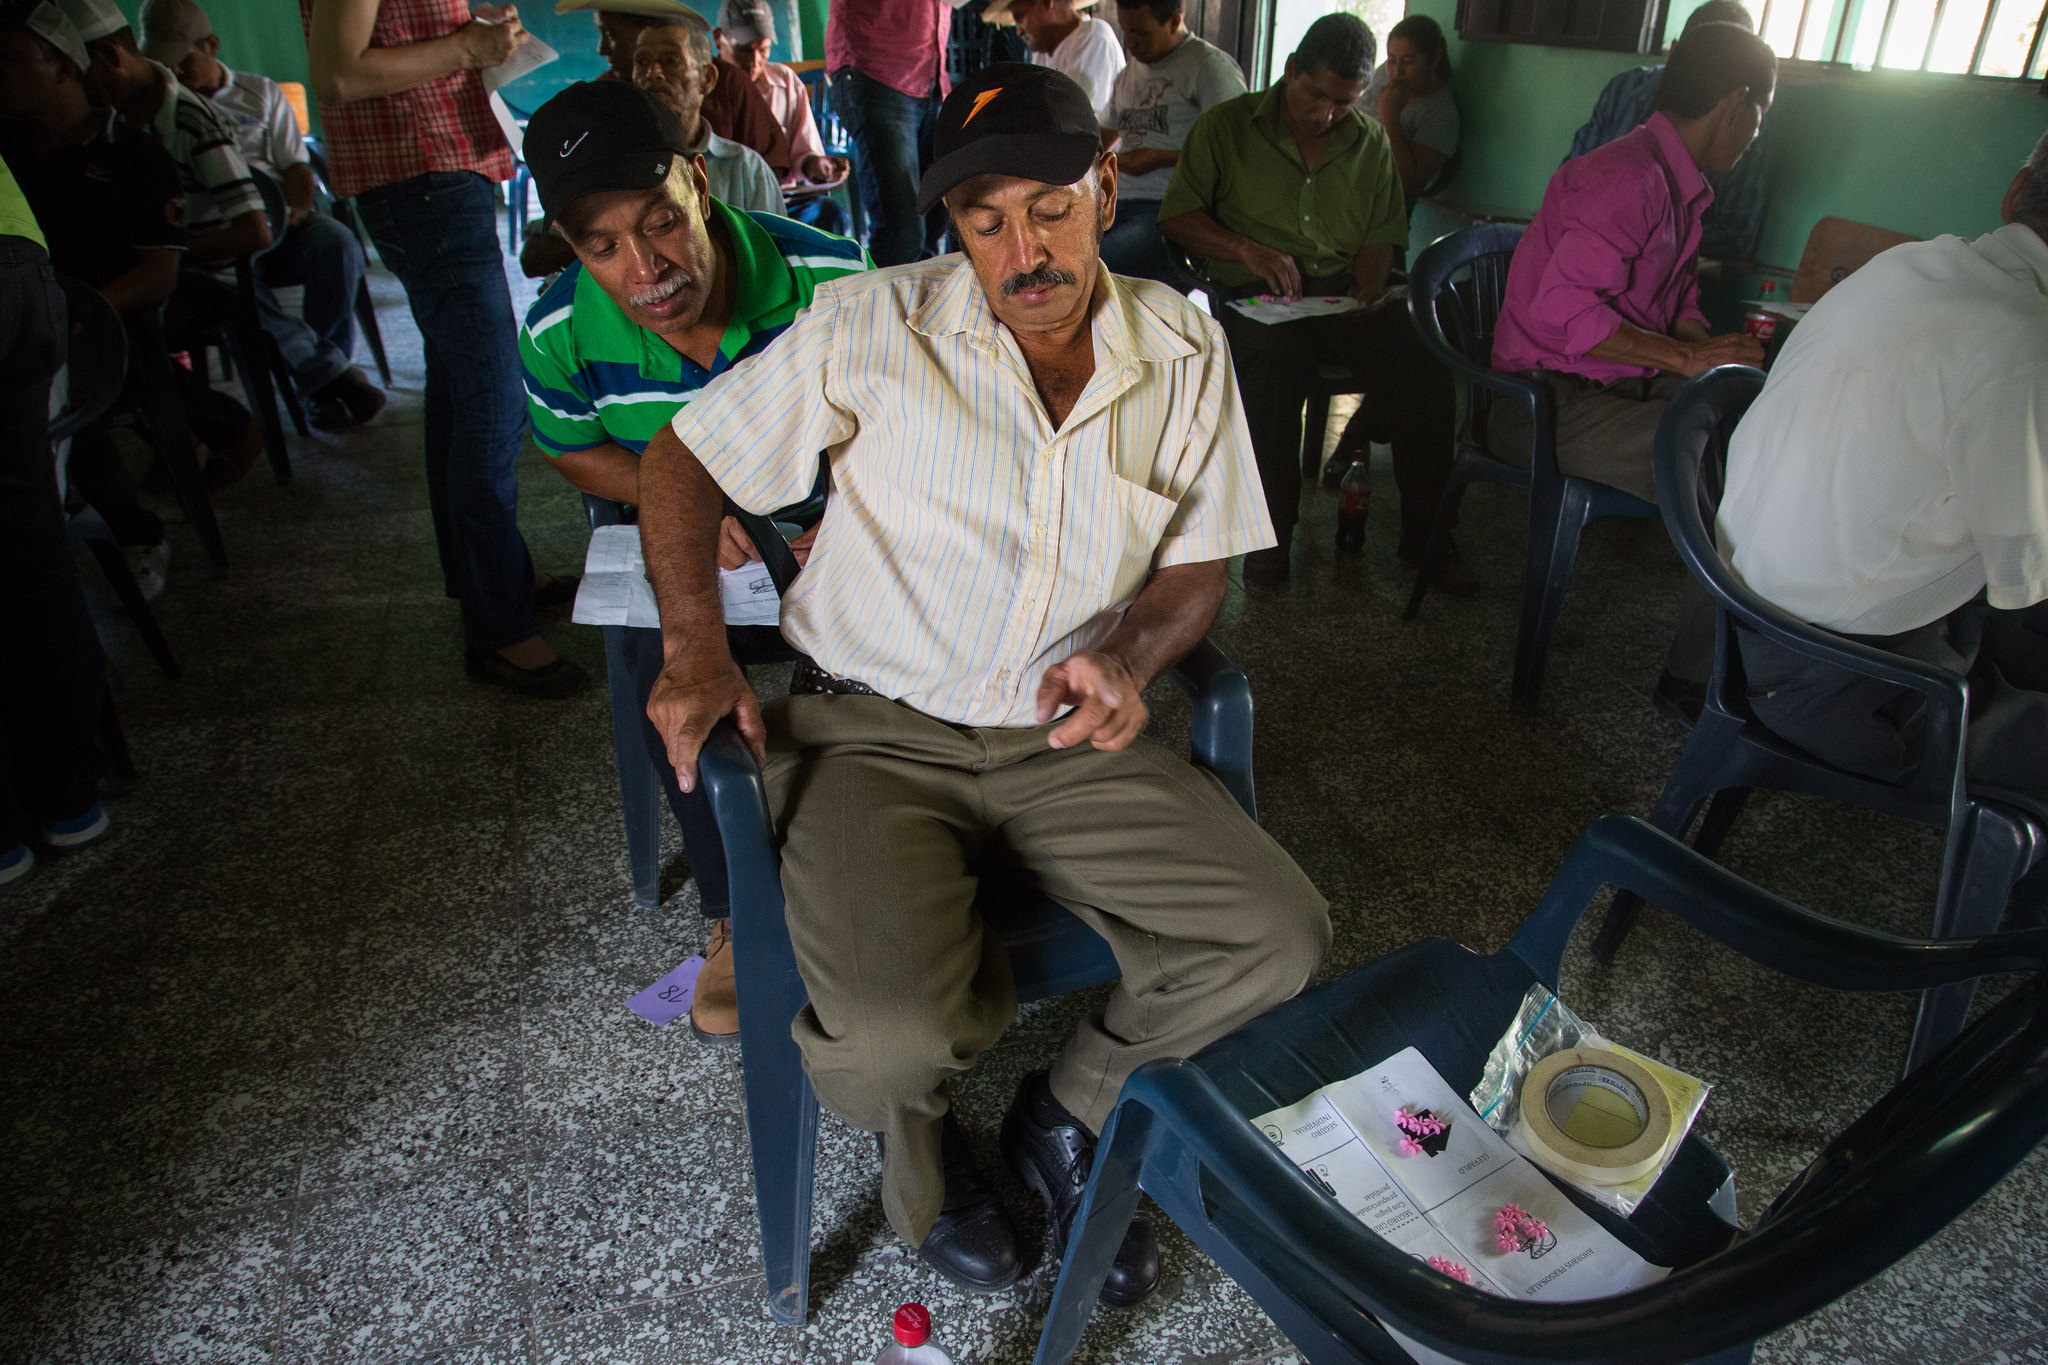 Farmers in El Barro community of Morocelí in southern Honduras discuss their decisions during a round of a game designed to record farmers' preferences for different kinds of insurance products.